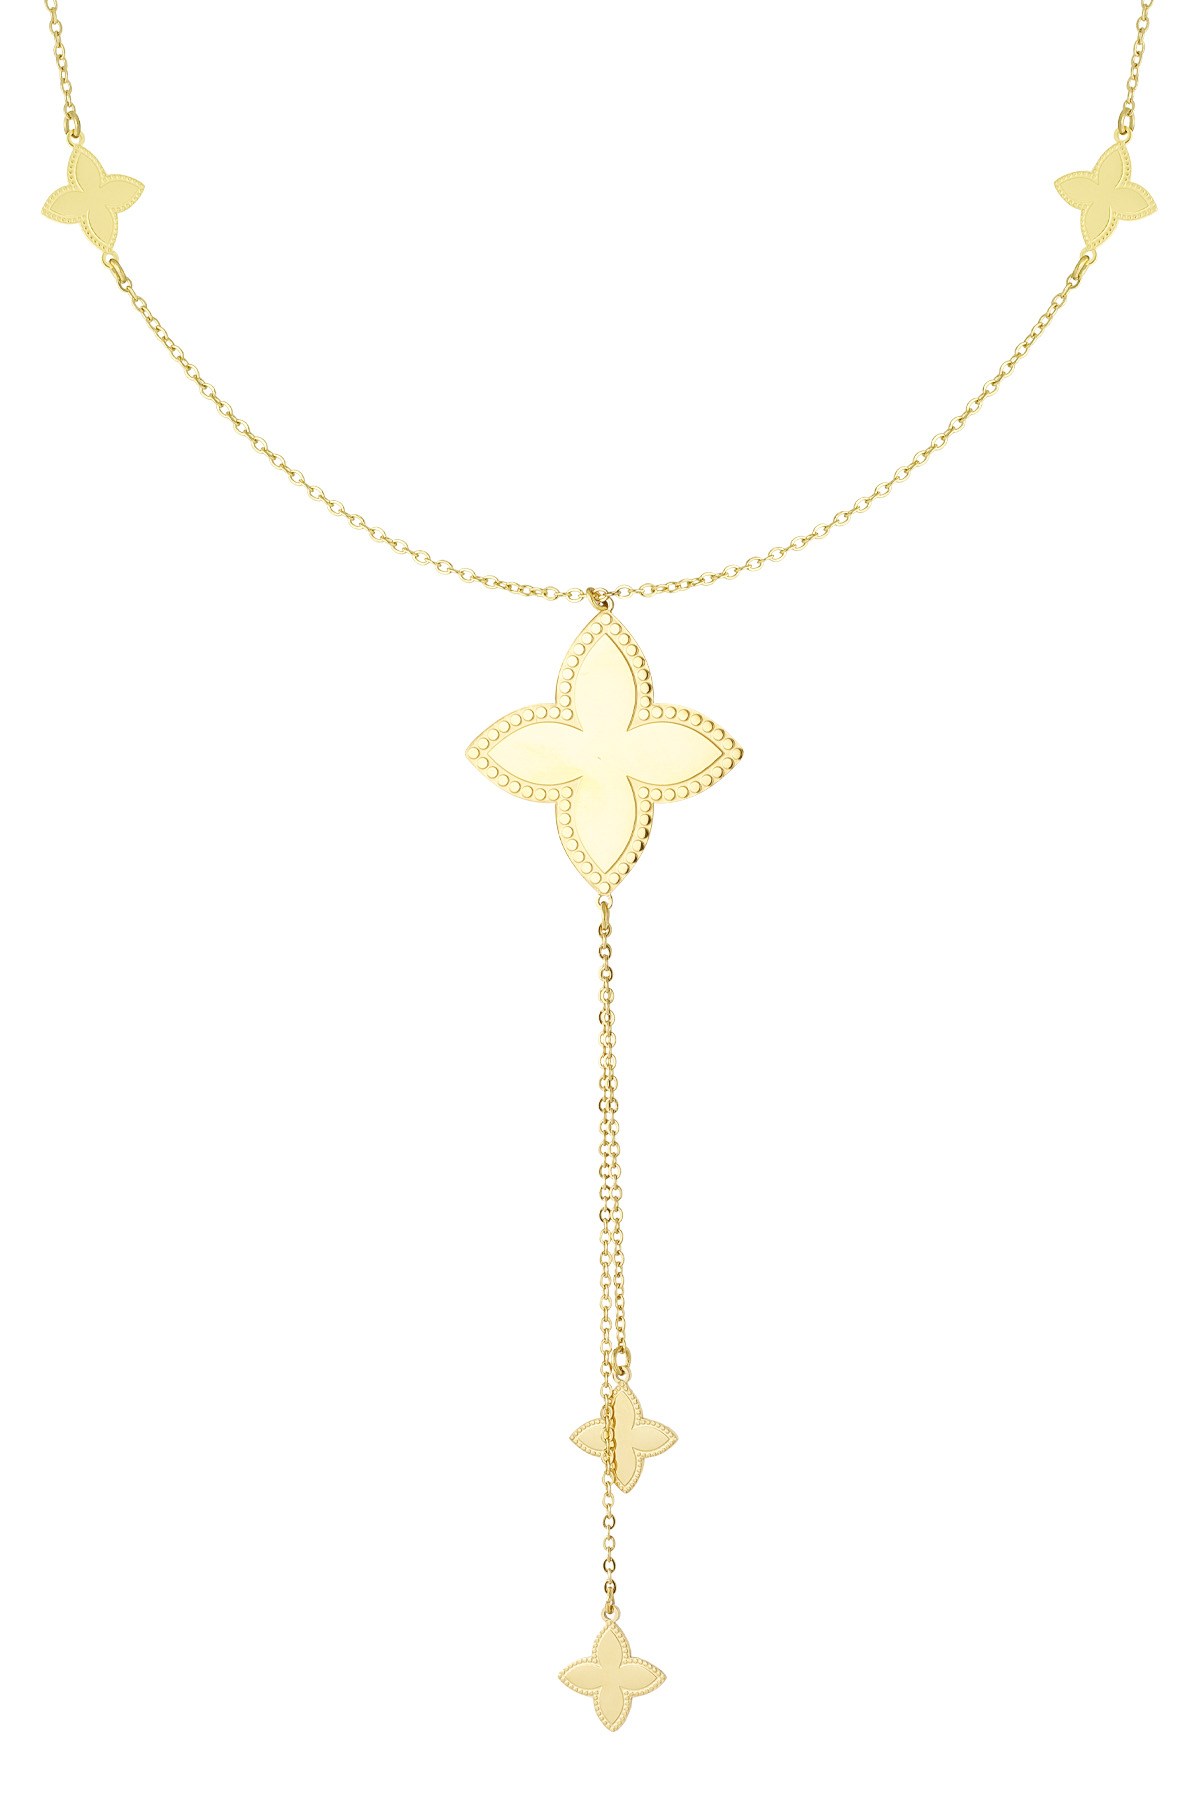 Long necklace with various clover charms - gold 